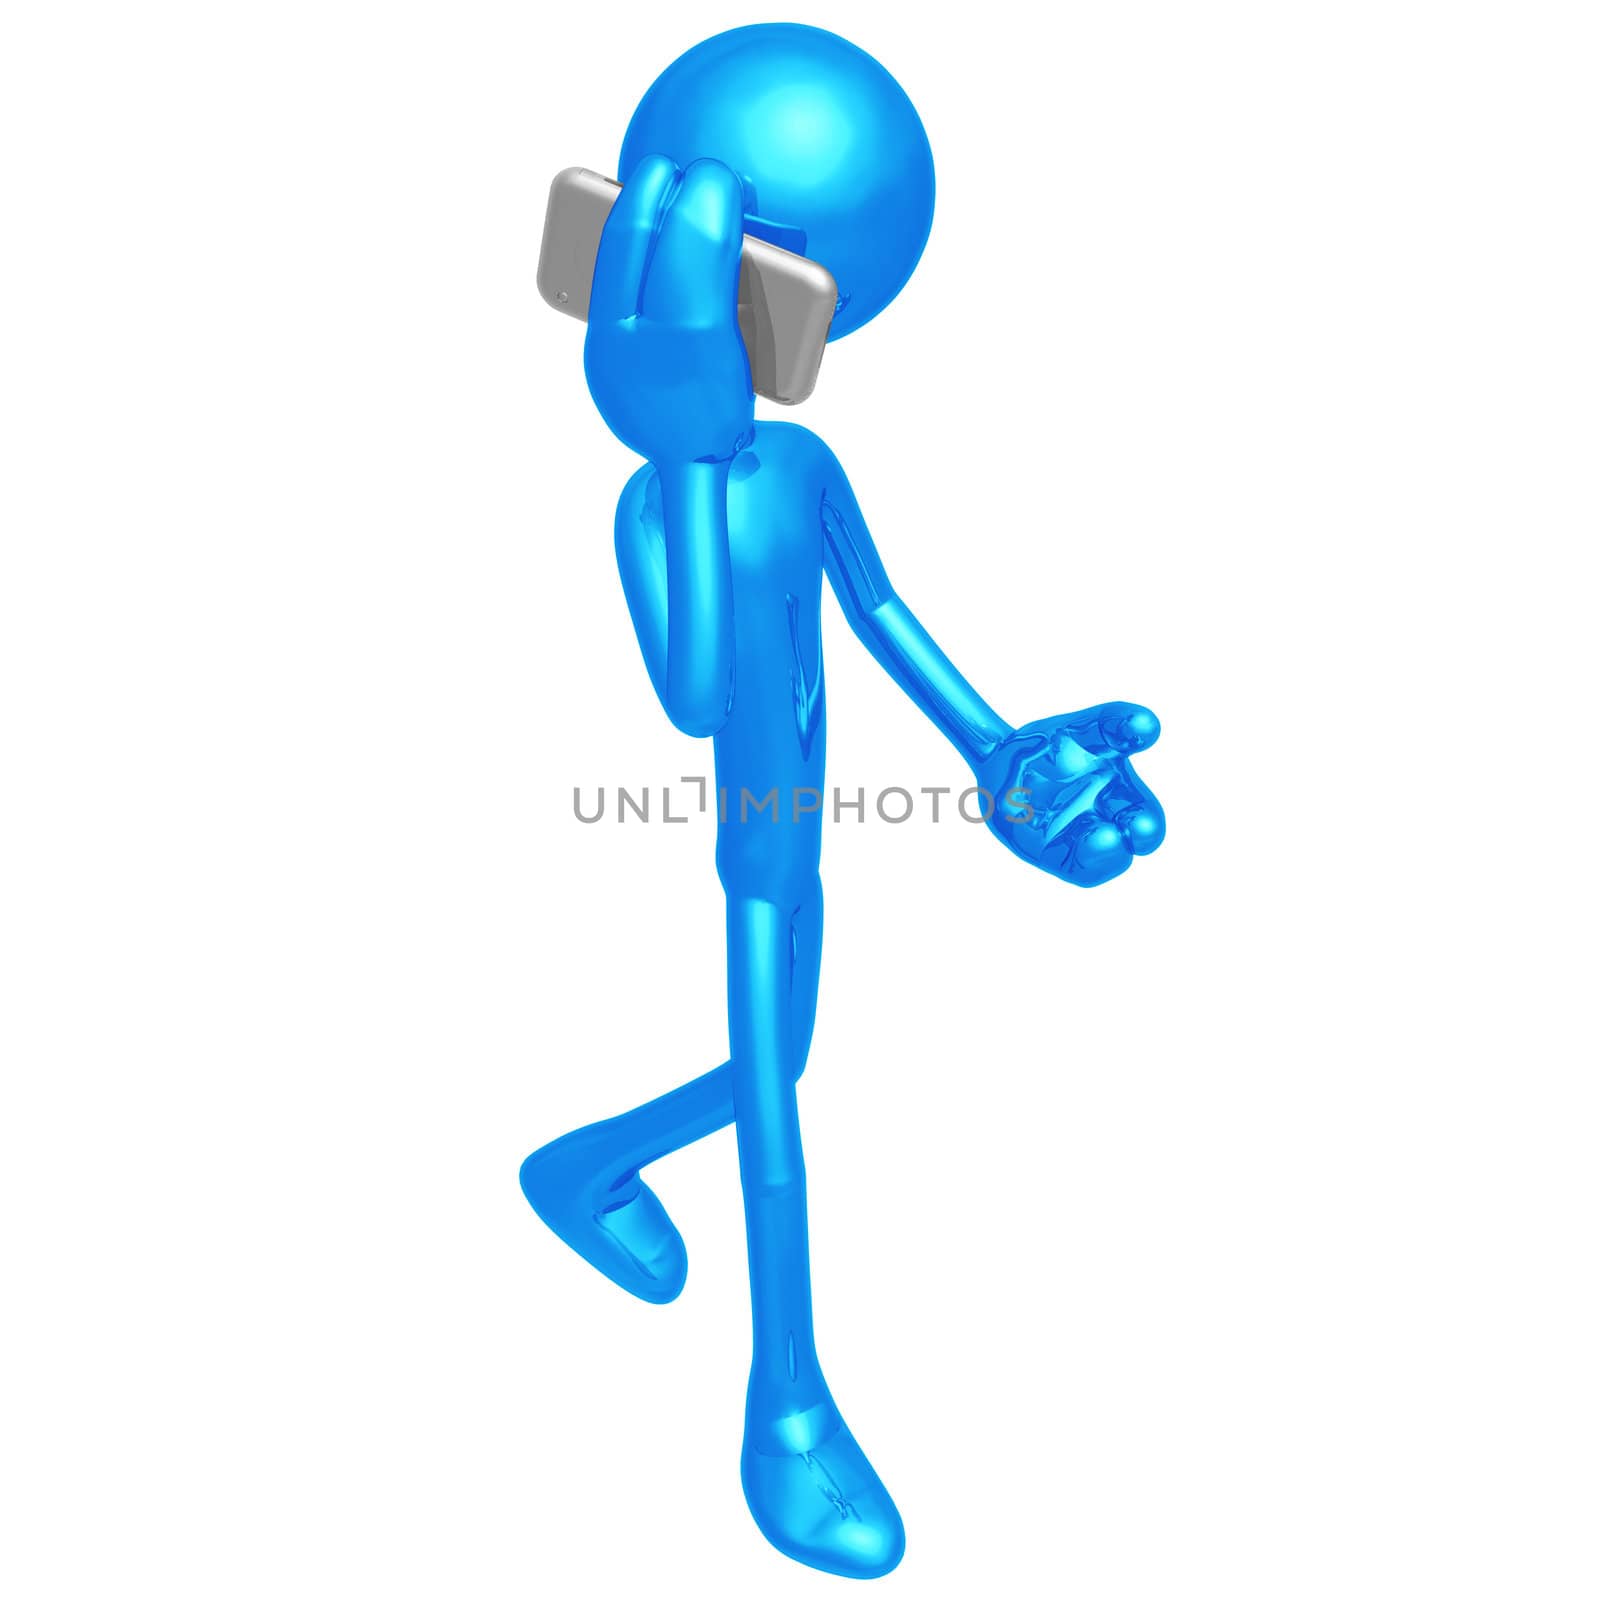 A Concept And Presentation Figure in 3D